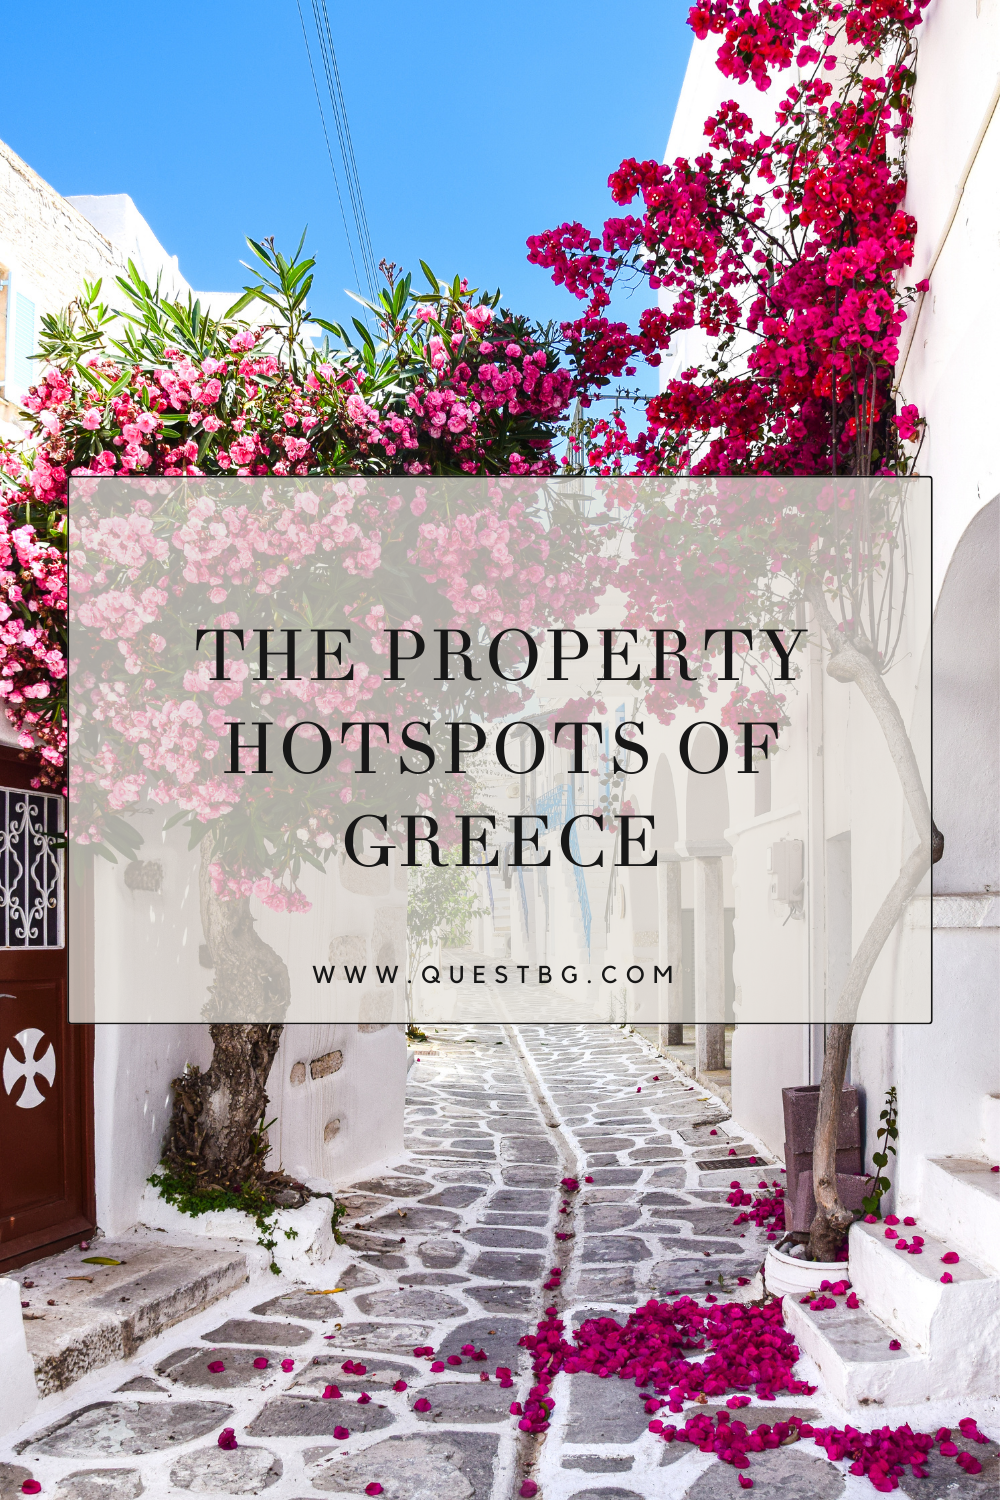 The Property Hotspots of Greece